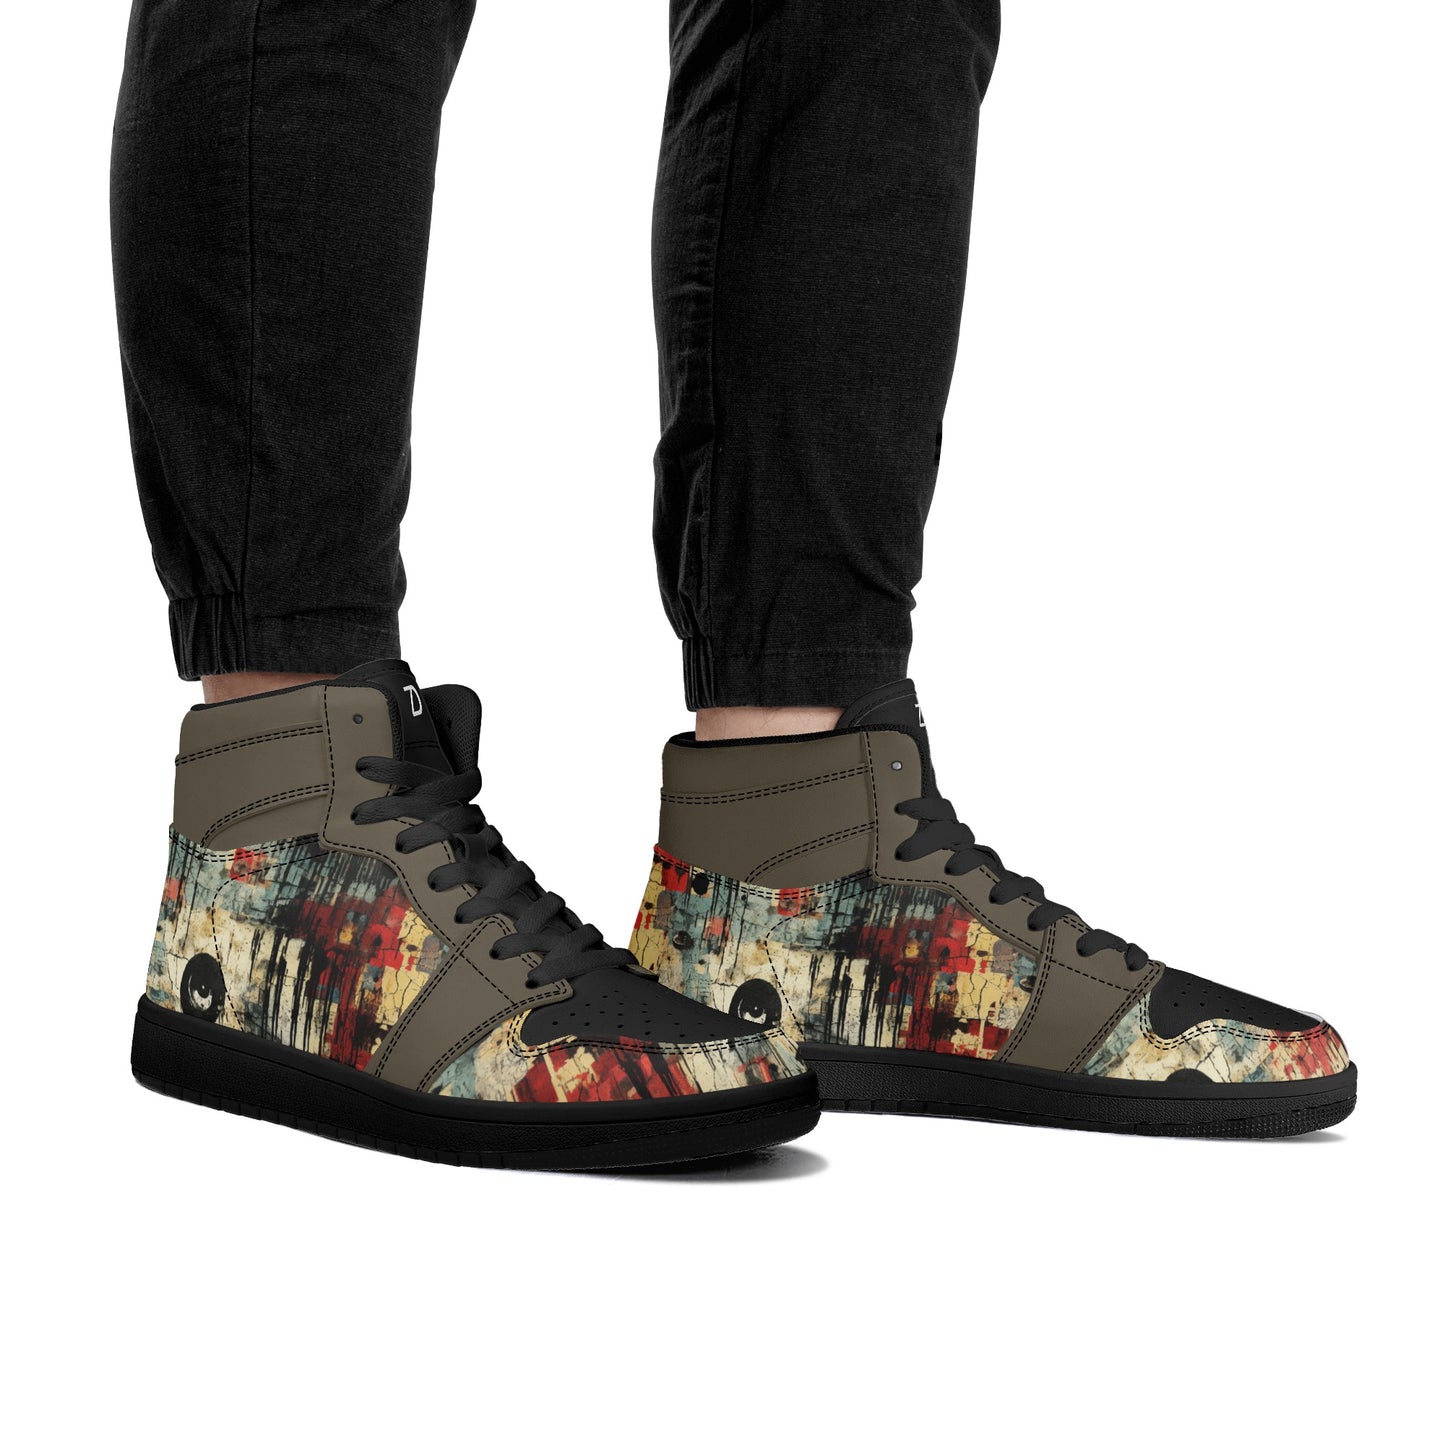 Neduz Mens Black Grunge Leather High Top Sneakers: Breathable, Comfortable, and Stylish for Every Season